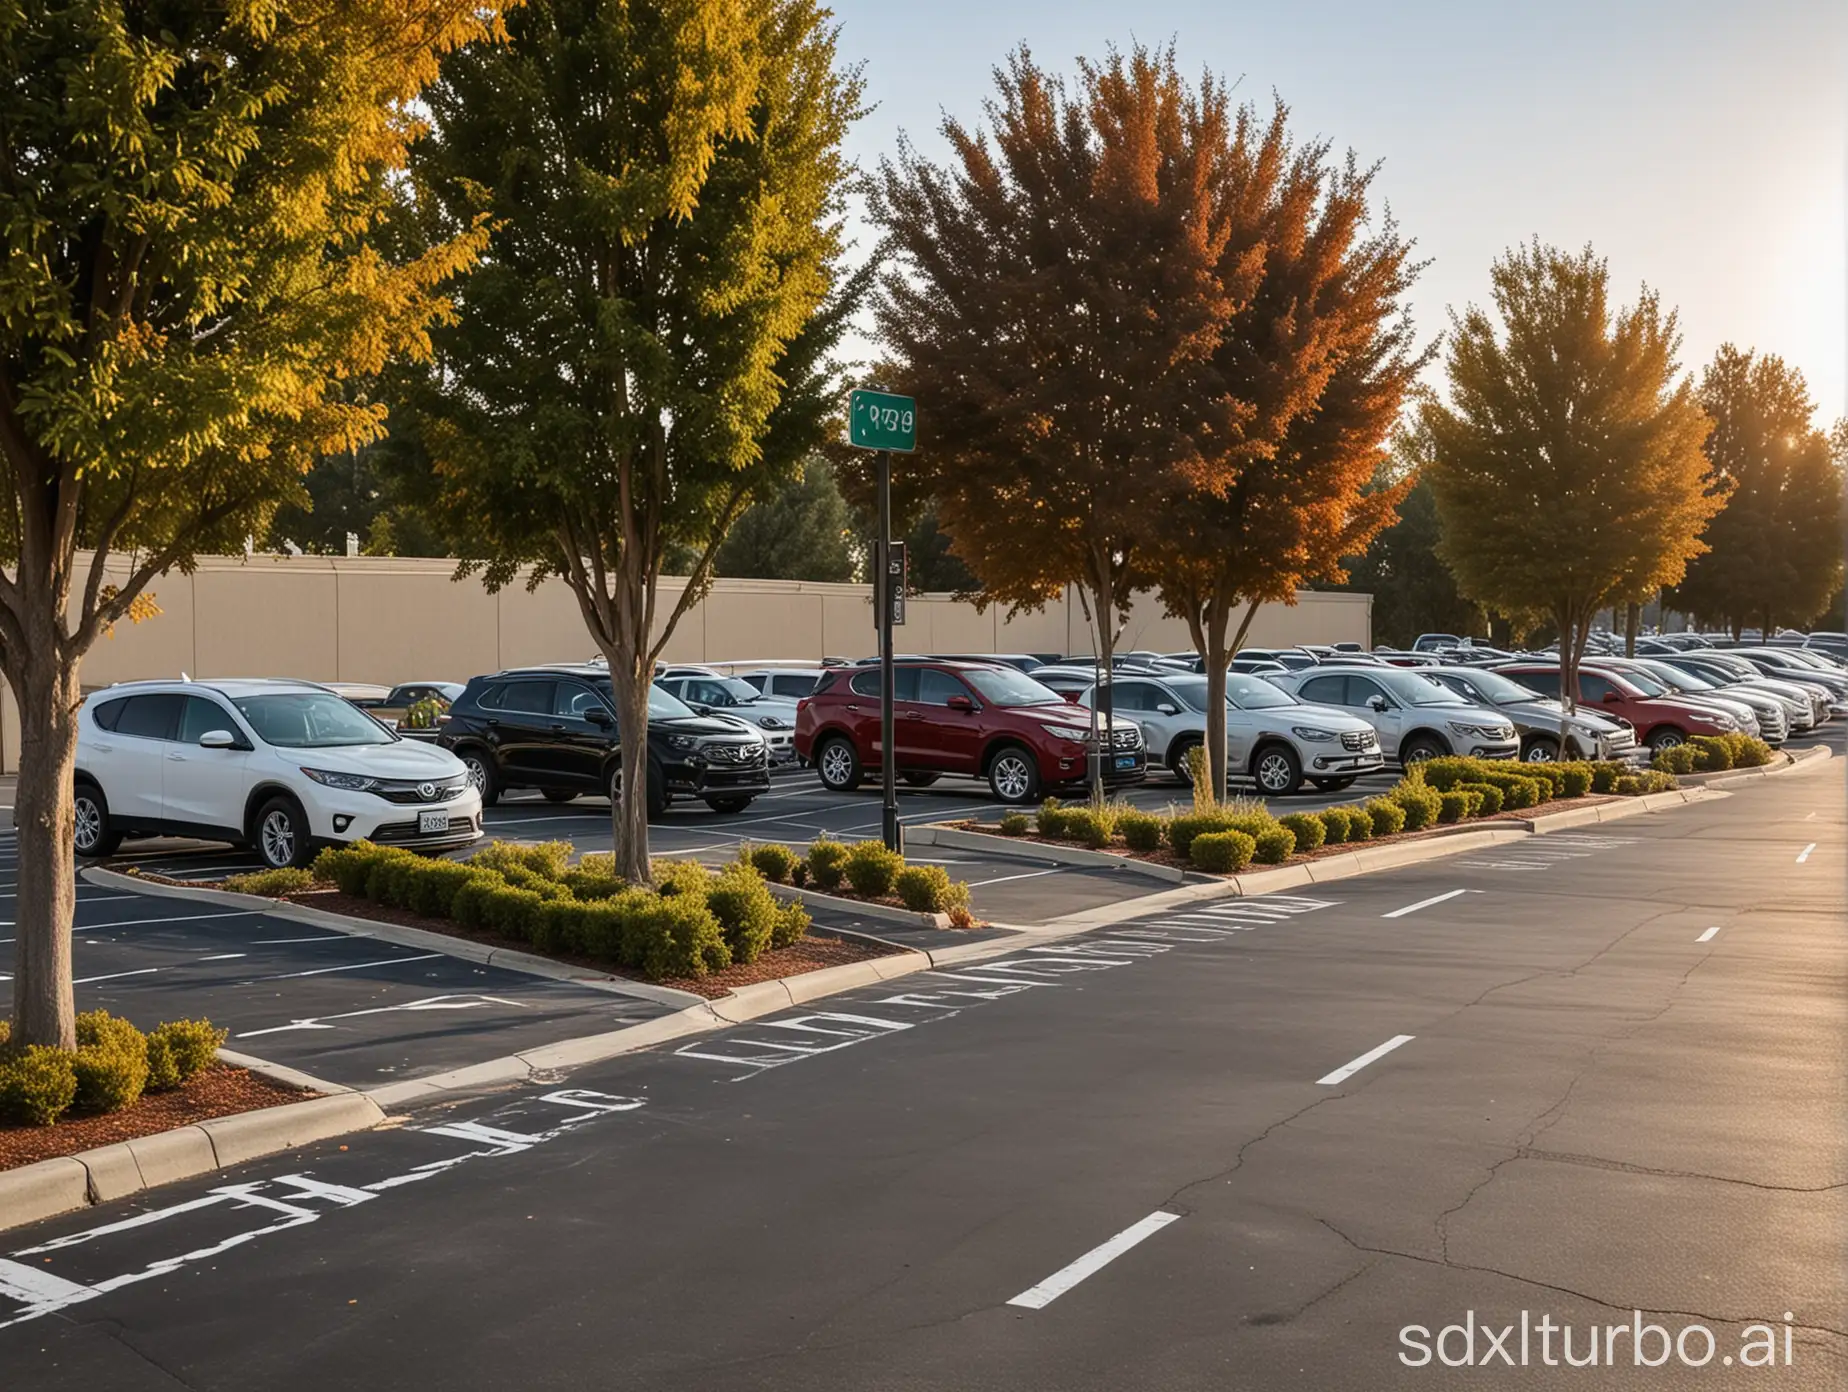 Vibrant-Outdoor-Parking-Lot-with-Colorful-Cars-and-Sunlit-Atmosphere